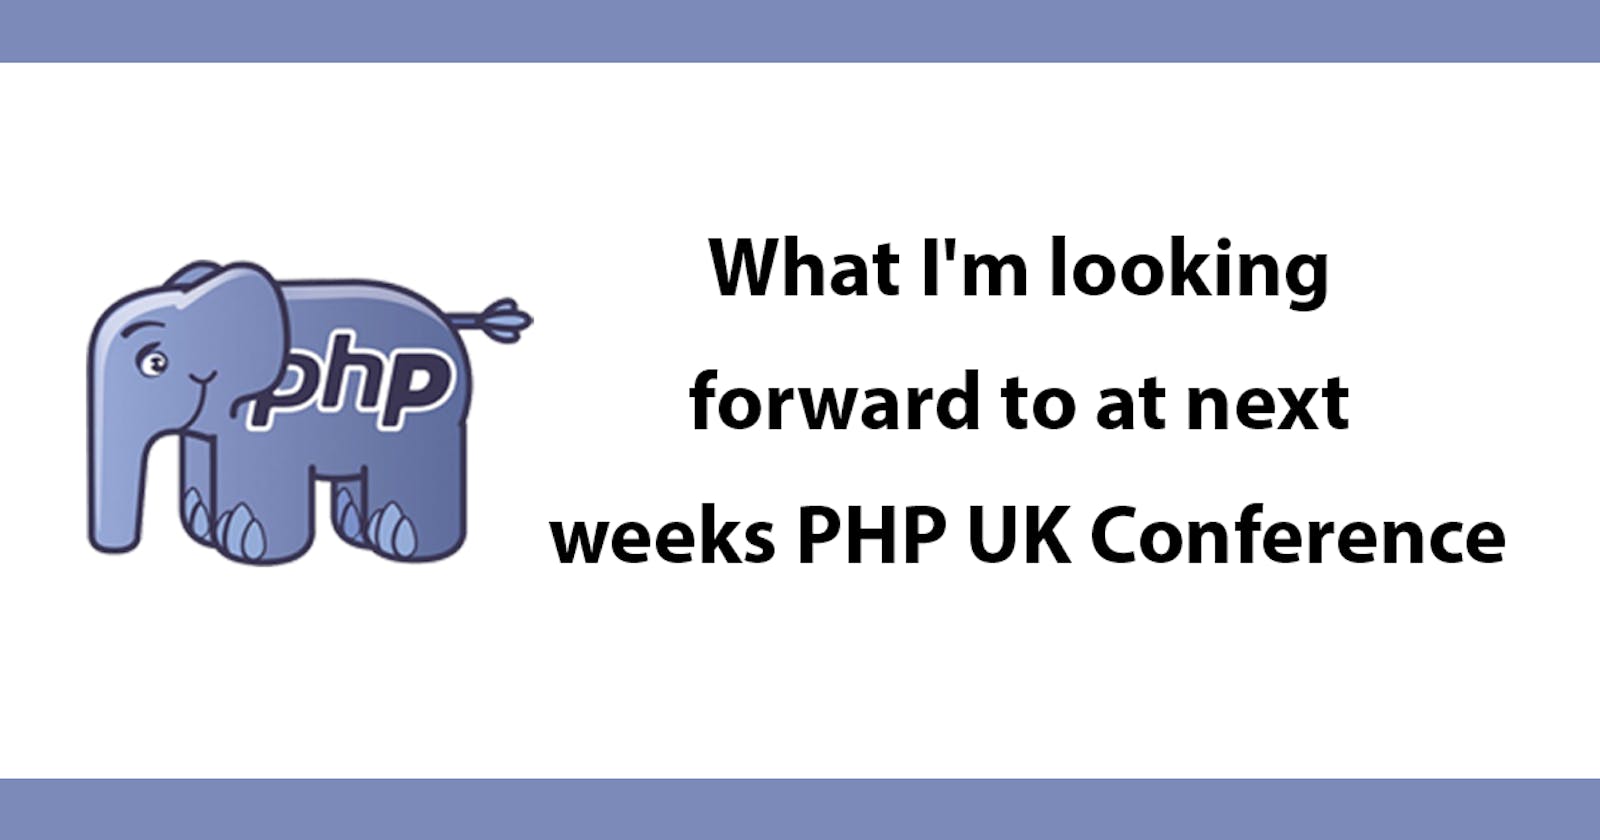 What I'm looking forward to at next weeks PHP UK Conference